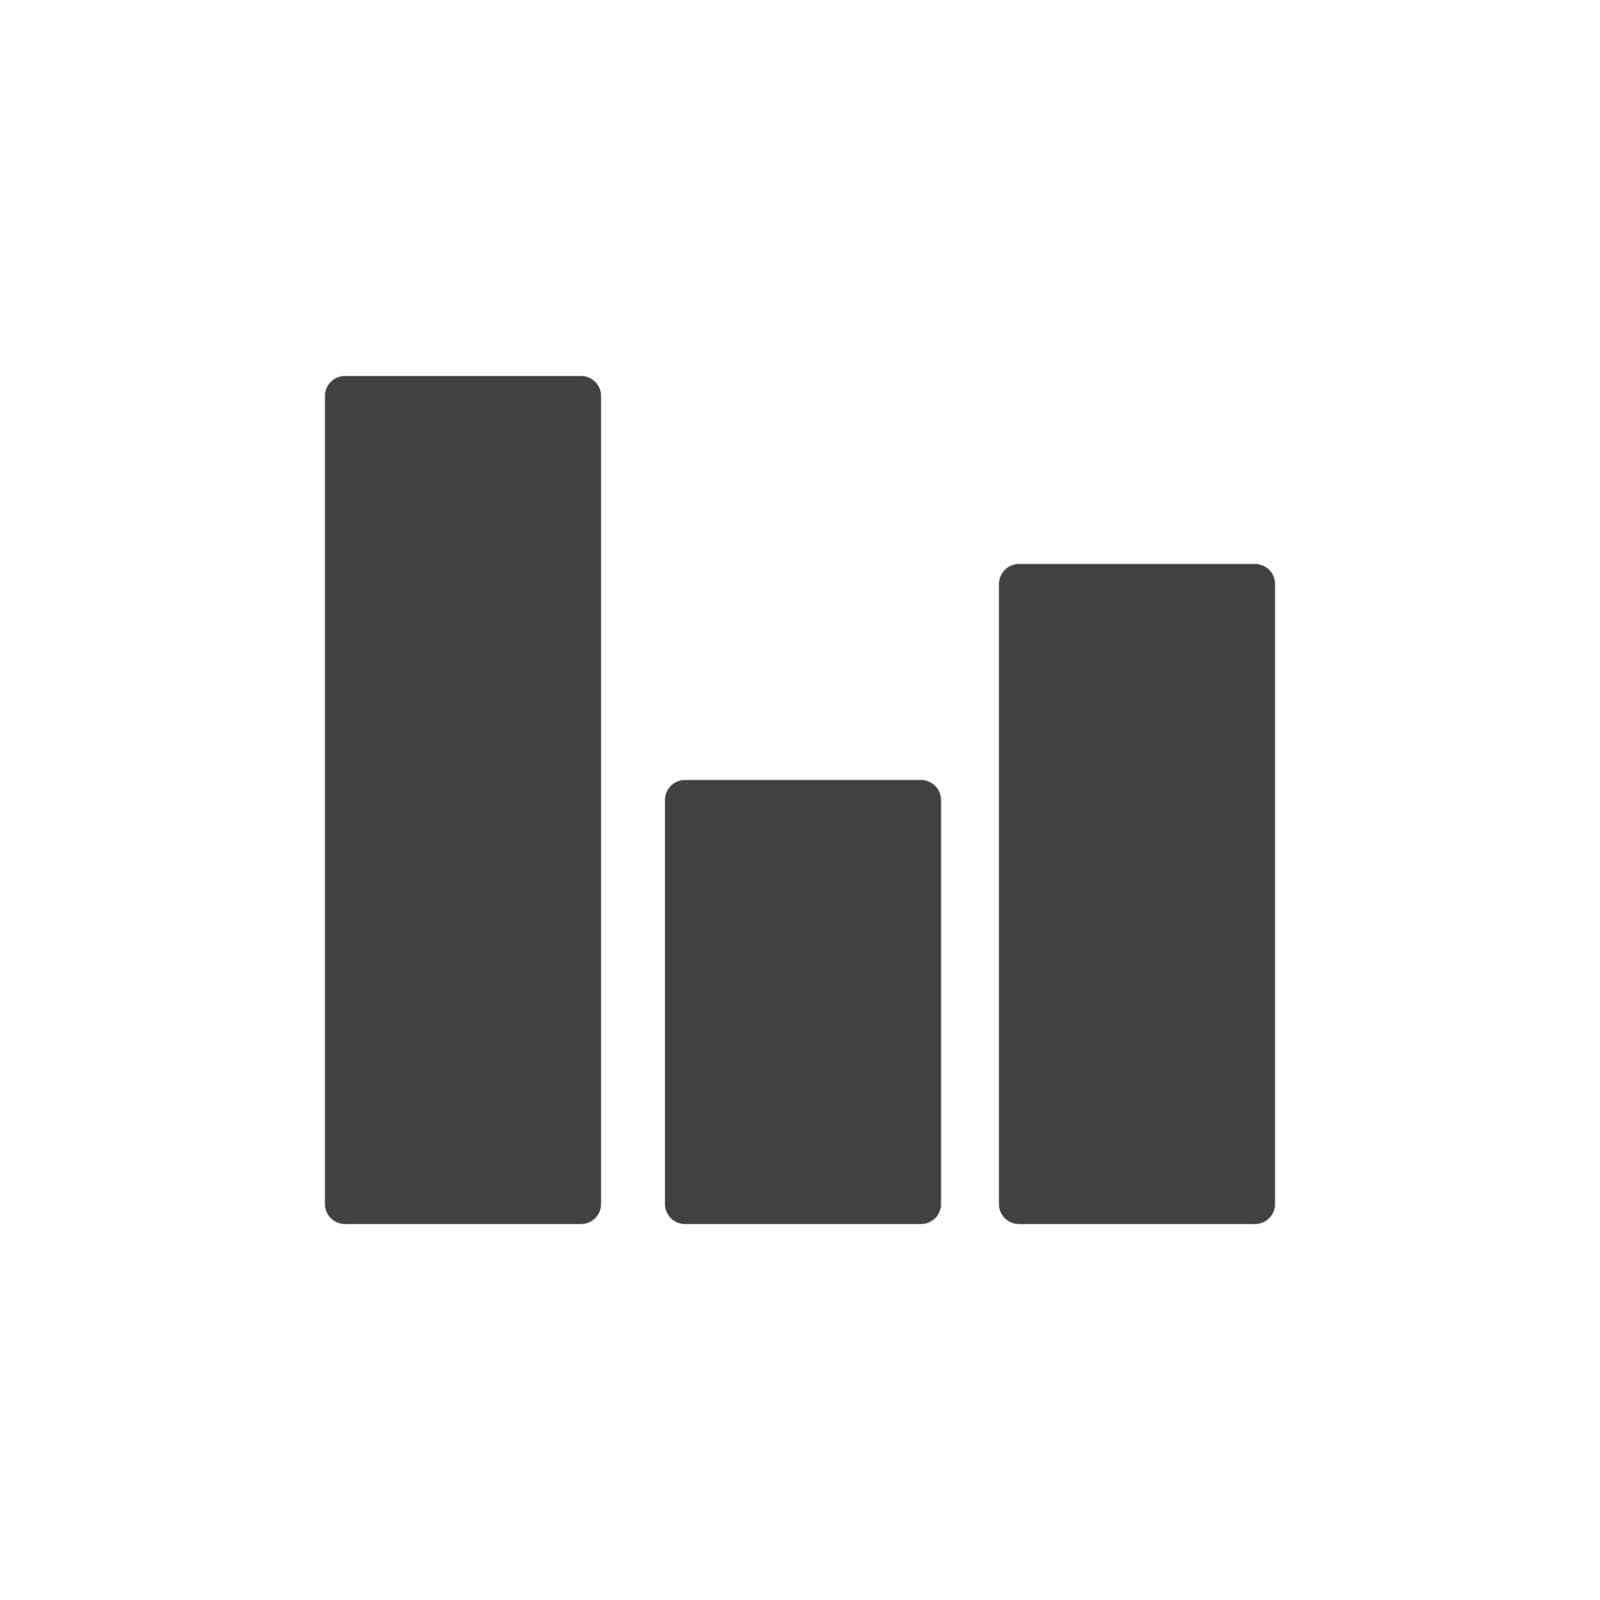 Graph data analysis icon by iconmama